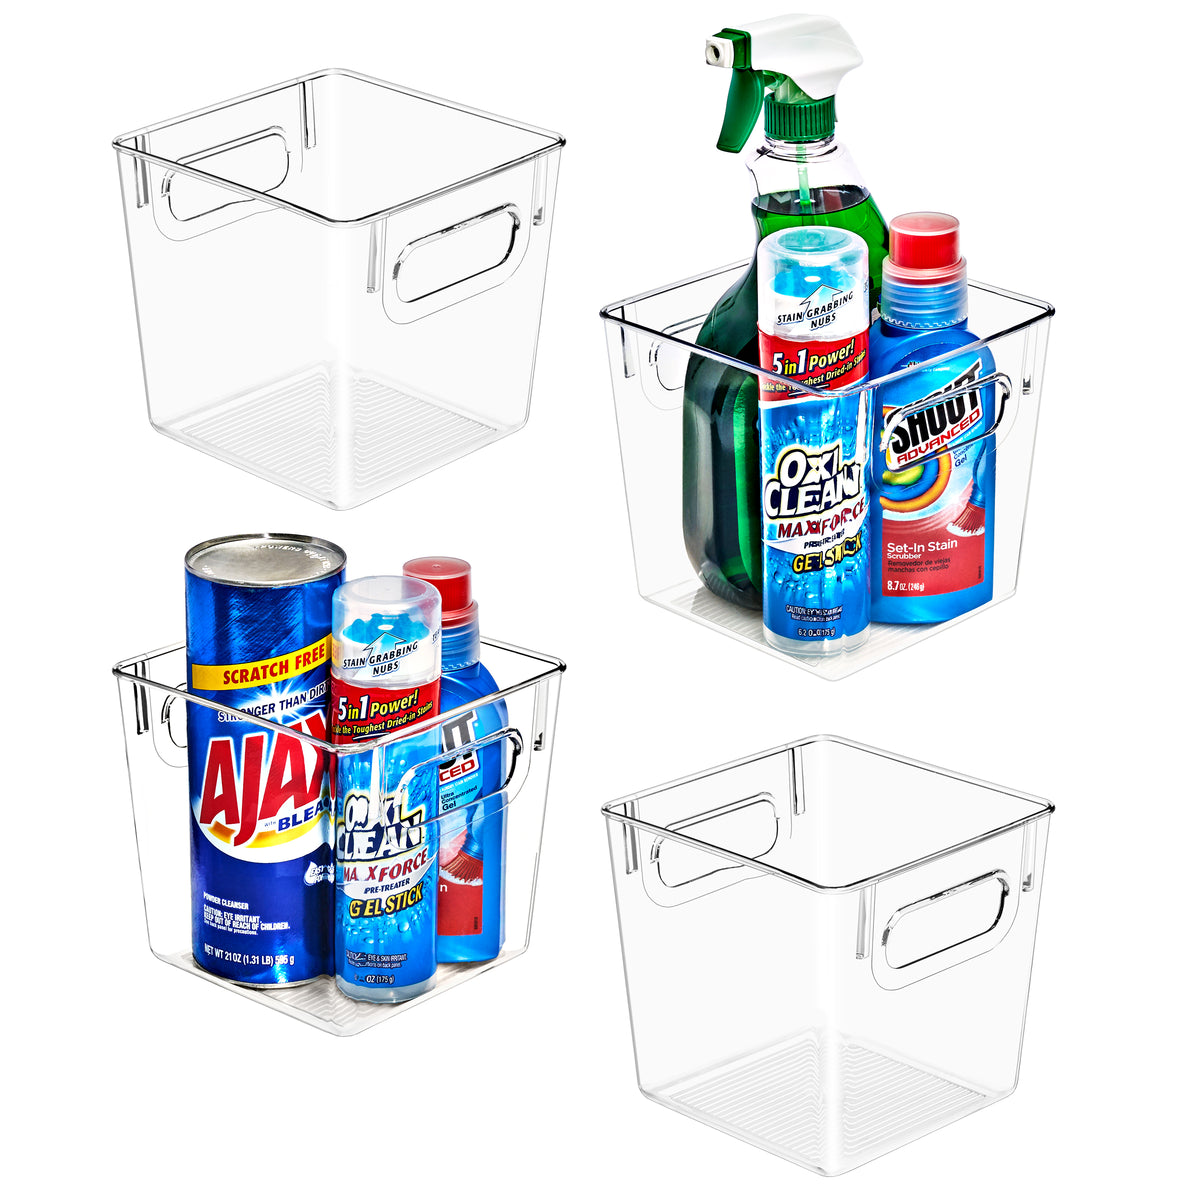 Clear Plastic Storage Bins with Handles for Cleaning Supplies (Small, 4-Pack)